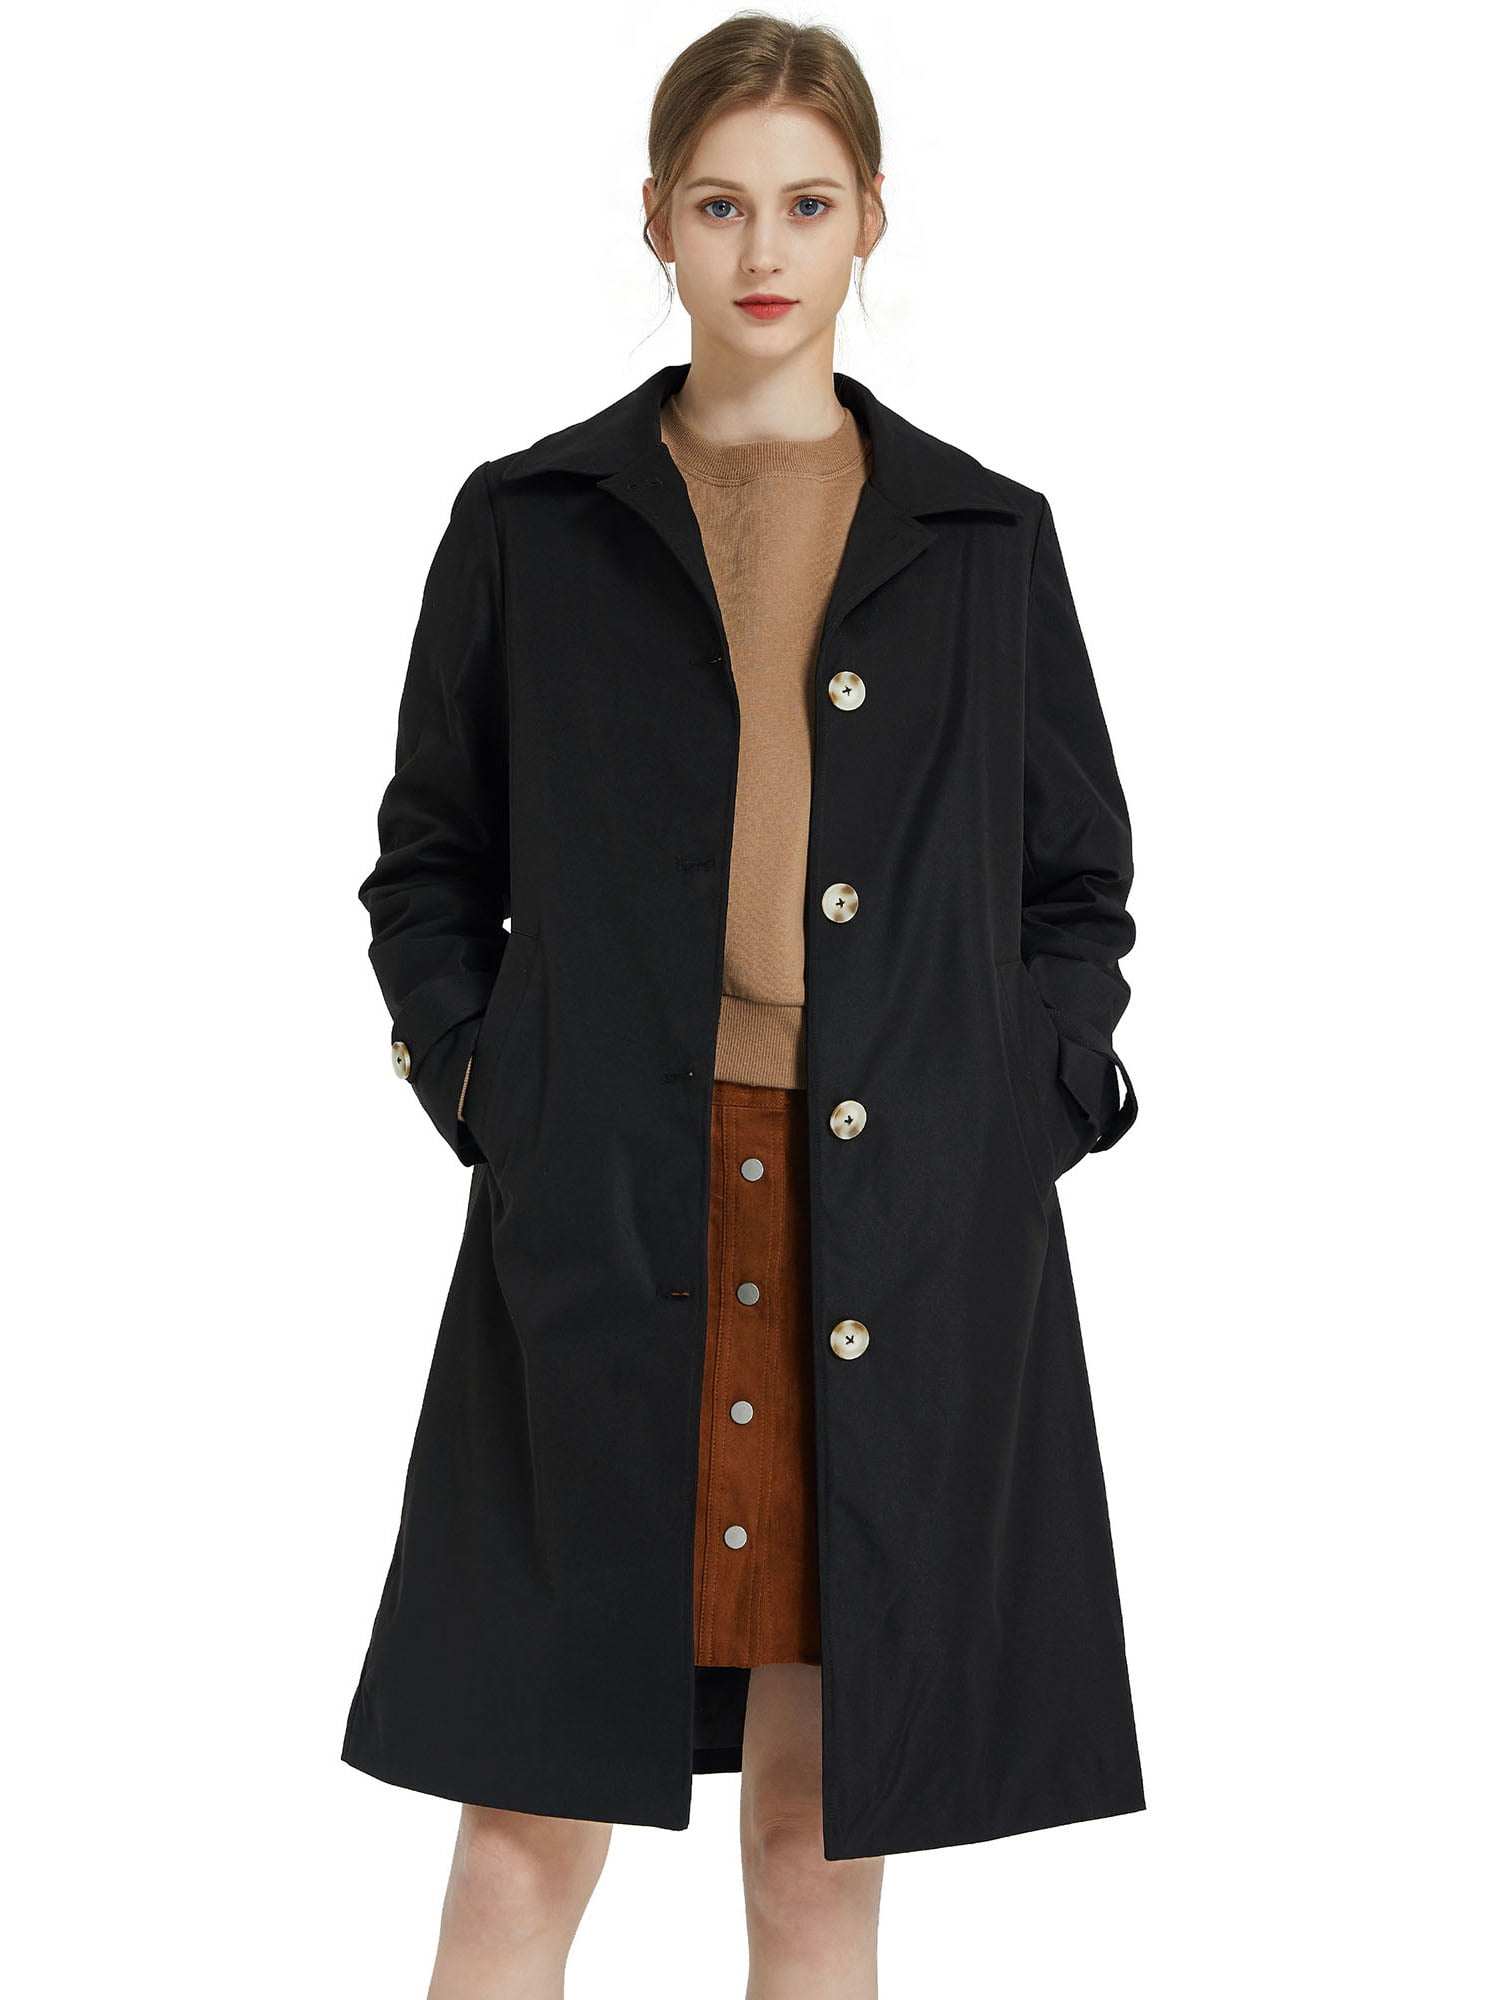 Orolay Womens Trench Coat with Belt Lightweight Double-Breasted Midi Length Overcoat